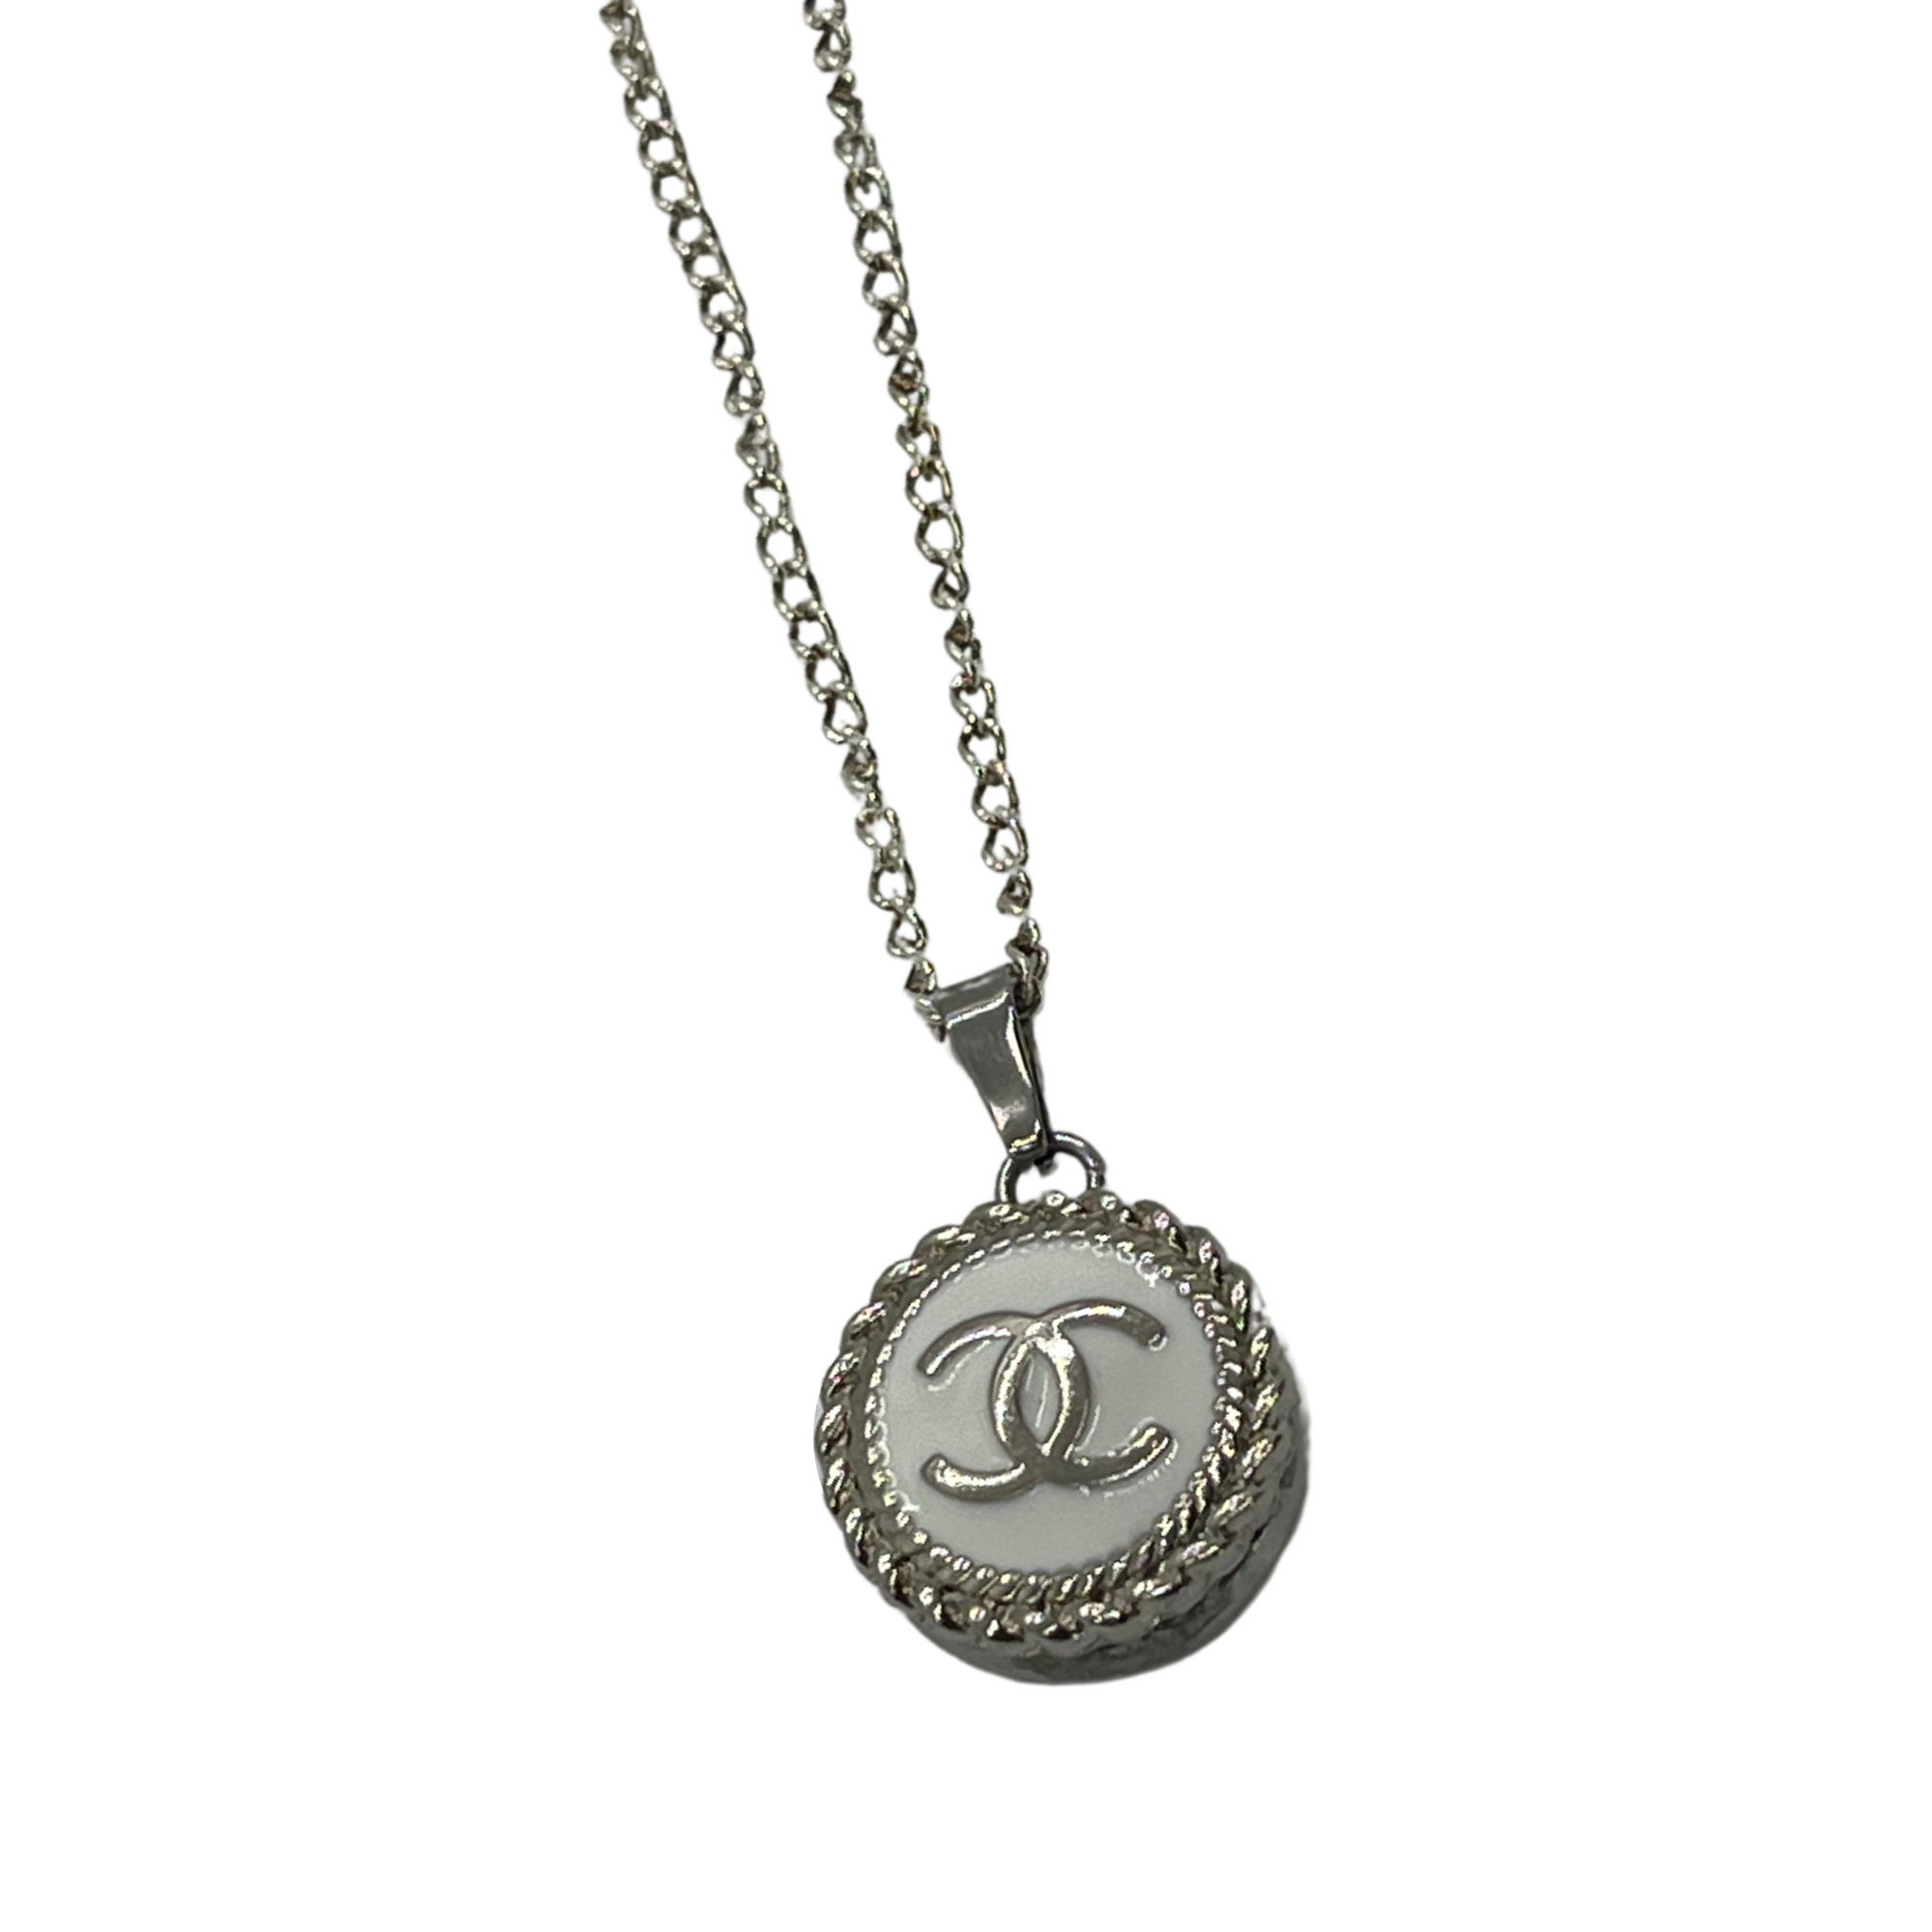 Preowned Chanel Interlocking C Necklace 560  liked on Polyvore  featuring jewelry necklaces silver pre owned jew  Chanel pendant  Necklace Chanel necklace